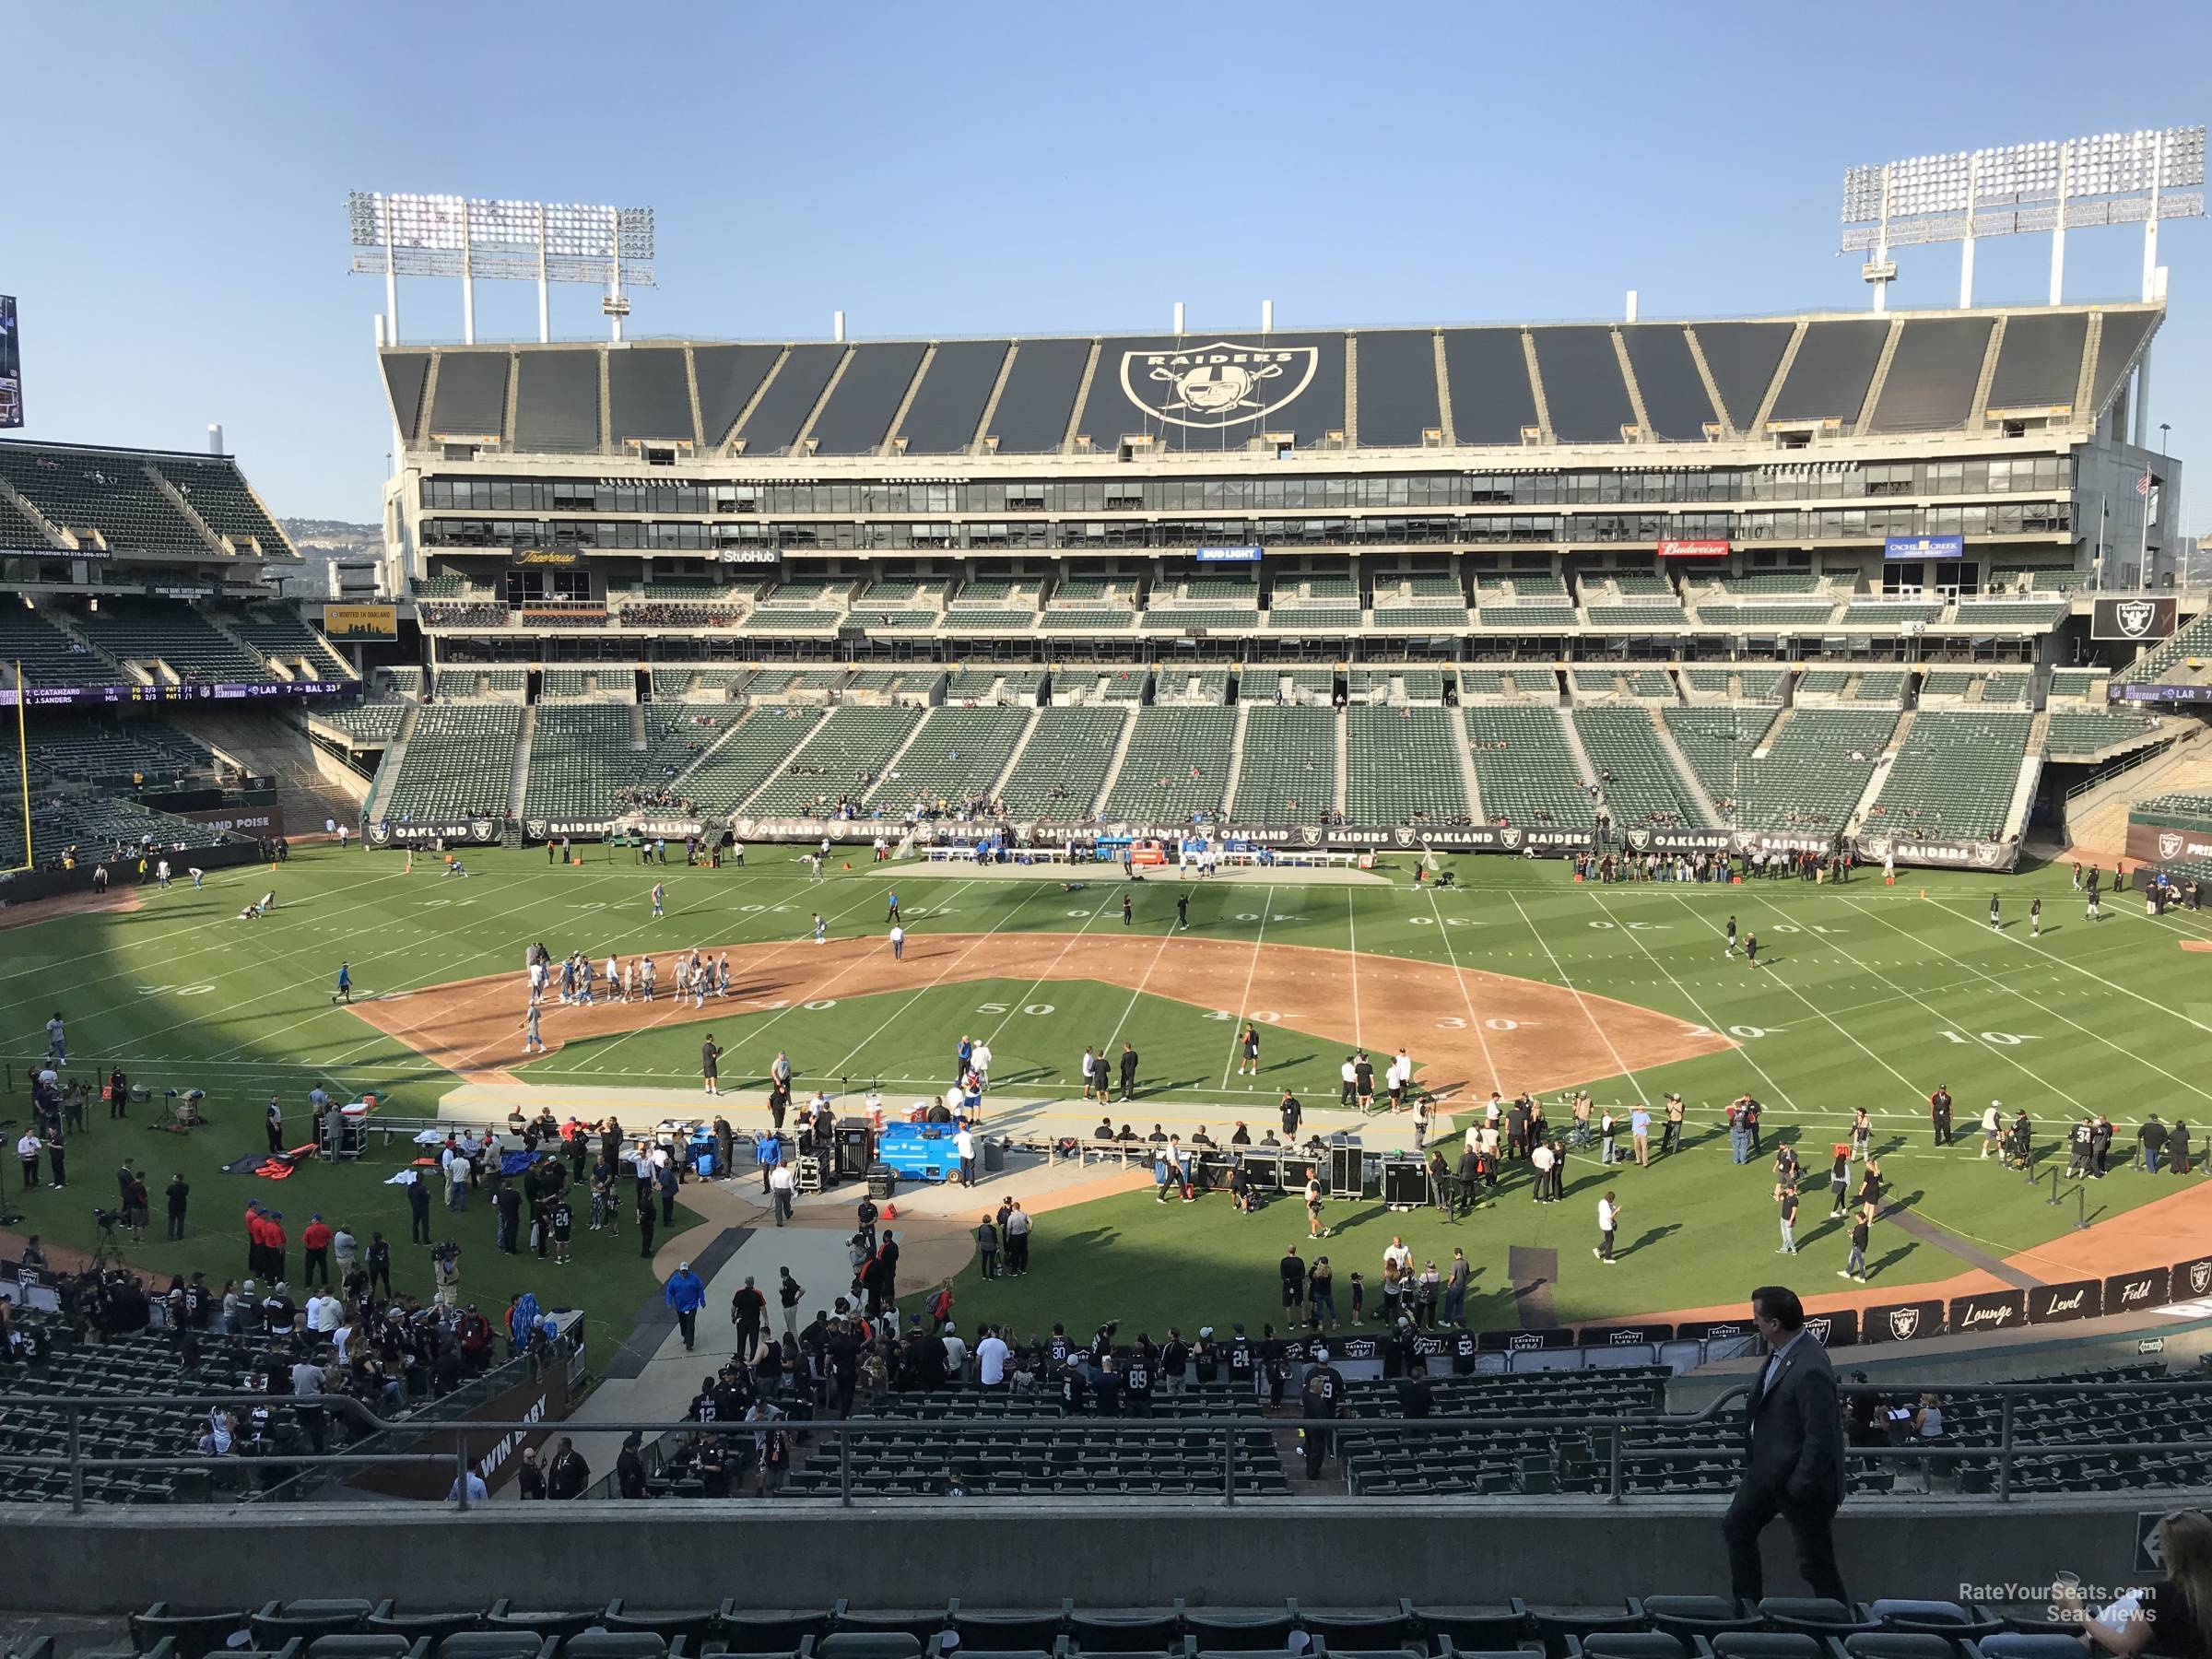 Oakland Raiders Seating Chart With Seat Numbers